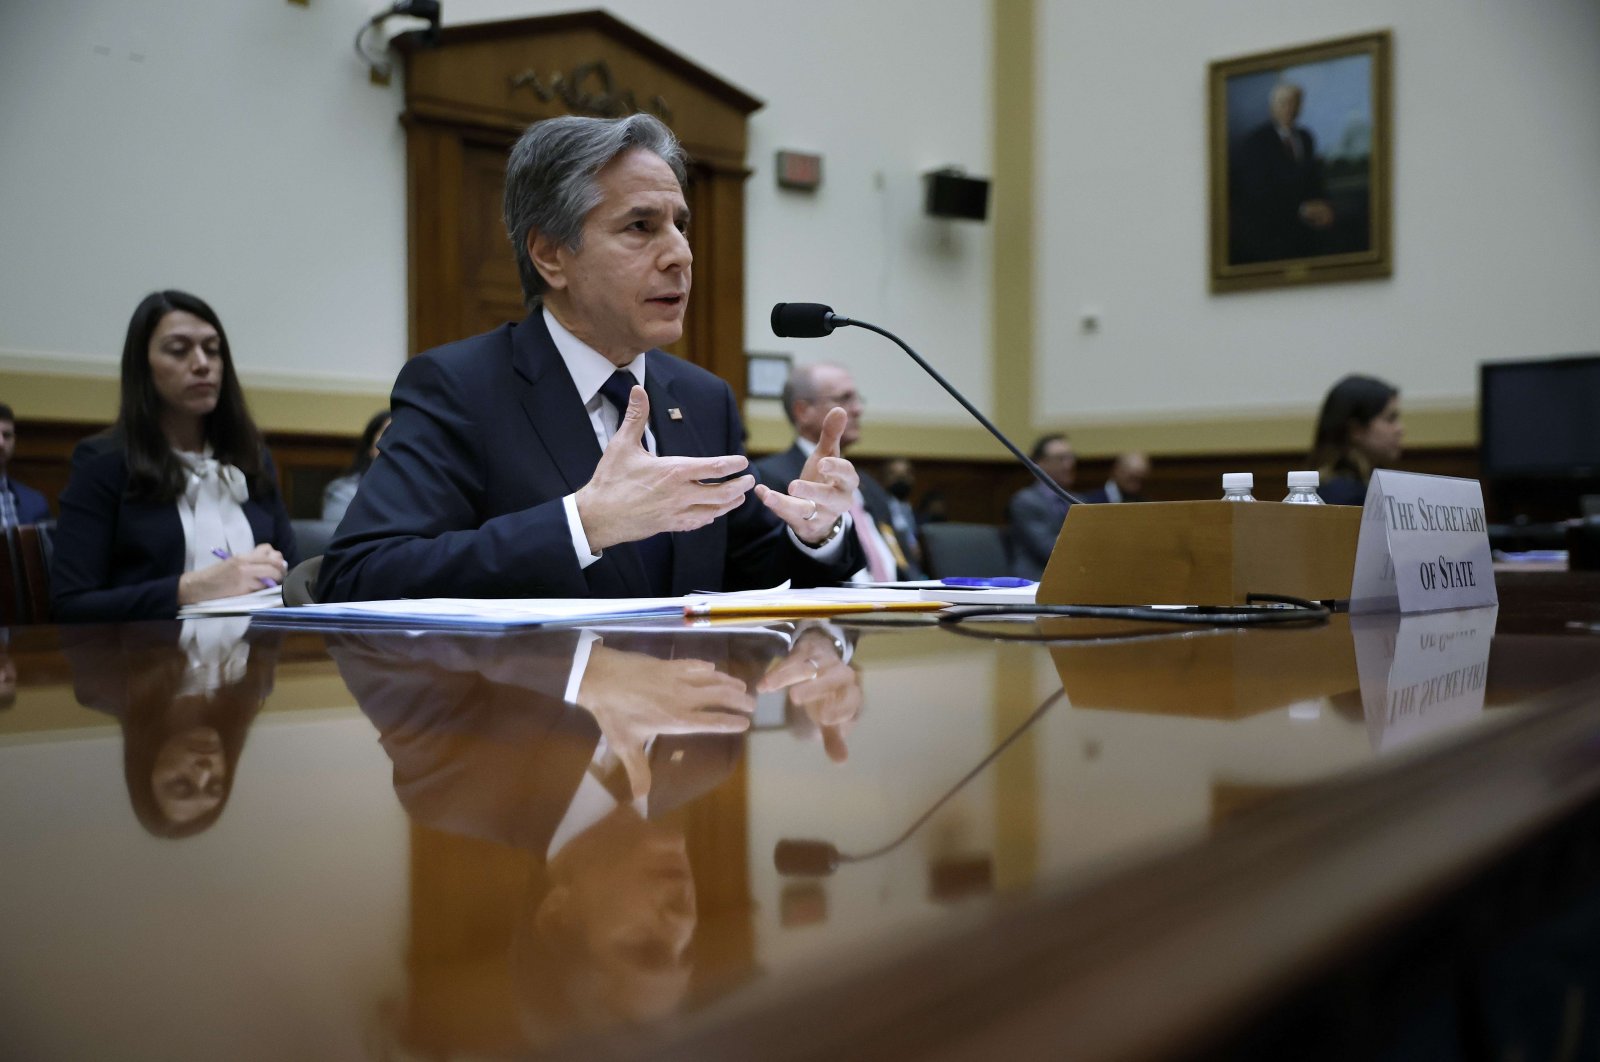 U.S. Secretary of State Antony Blinken testifies before the House Foreign Affairs Committee about the fiscal year 2023 budget request for the State Department in the Rayburn House Office Building on Capitol Hill in Washington, D.C., April 28, 2022. (AFP Photo)